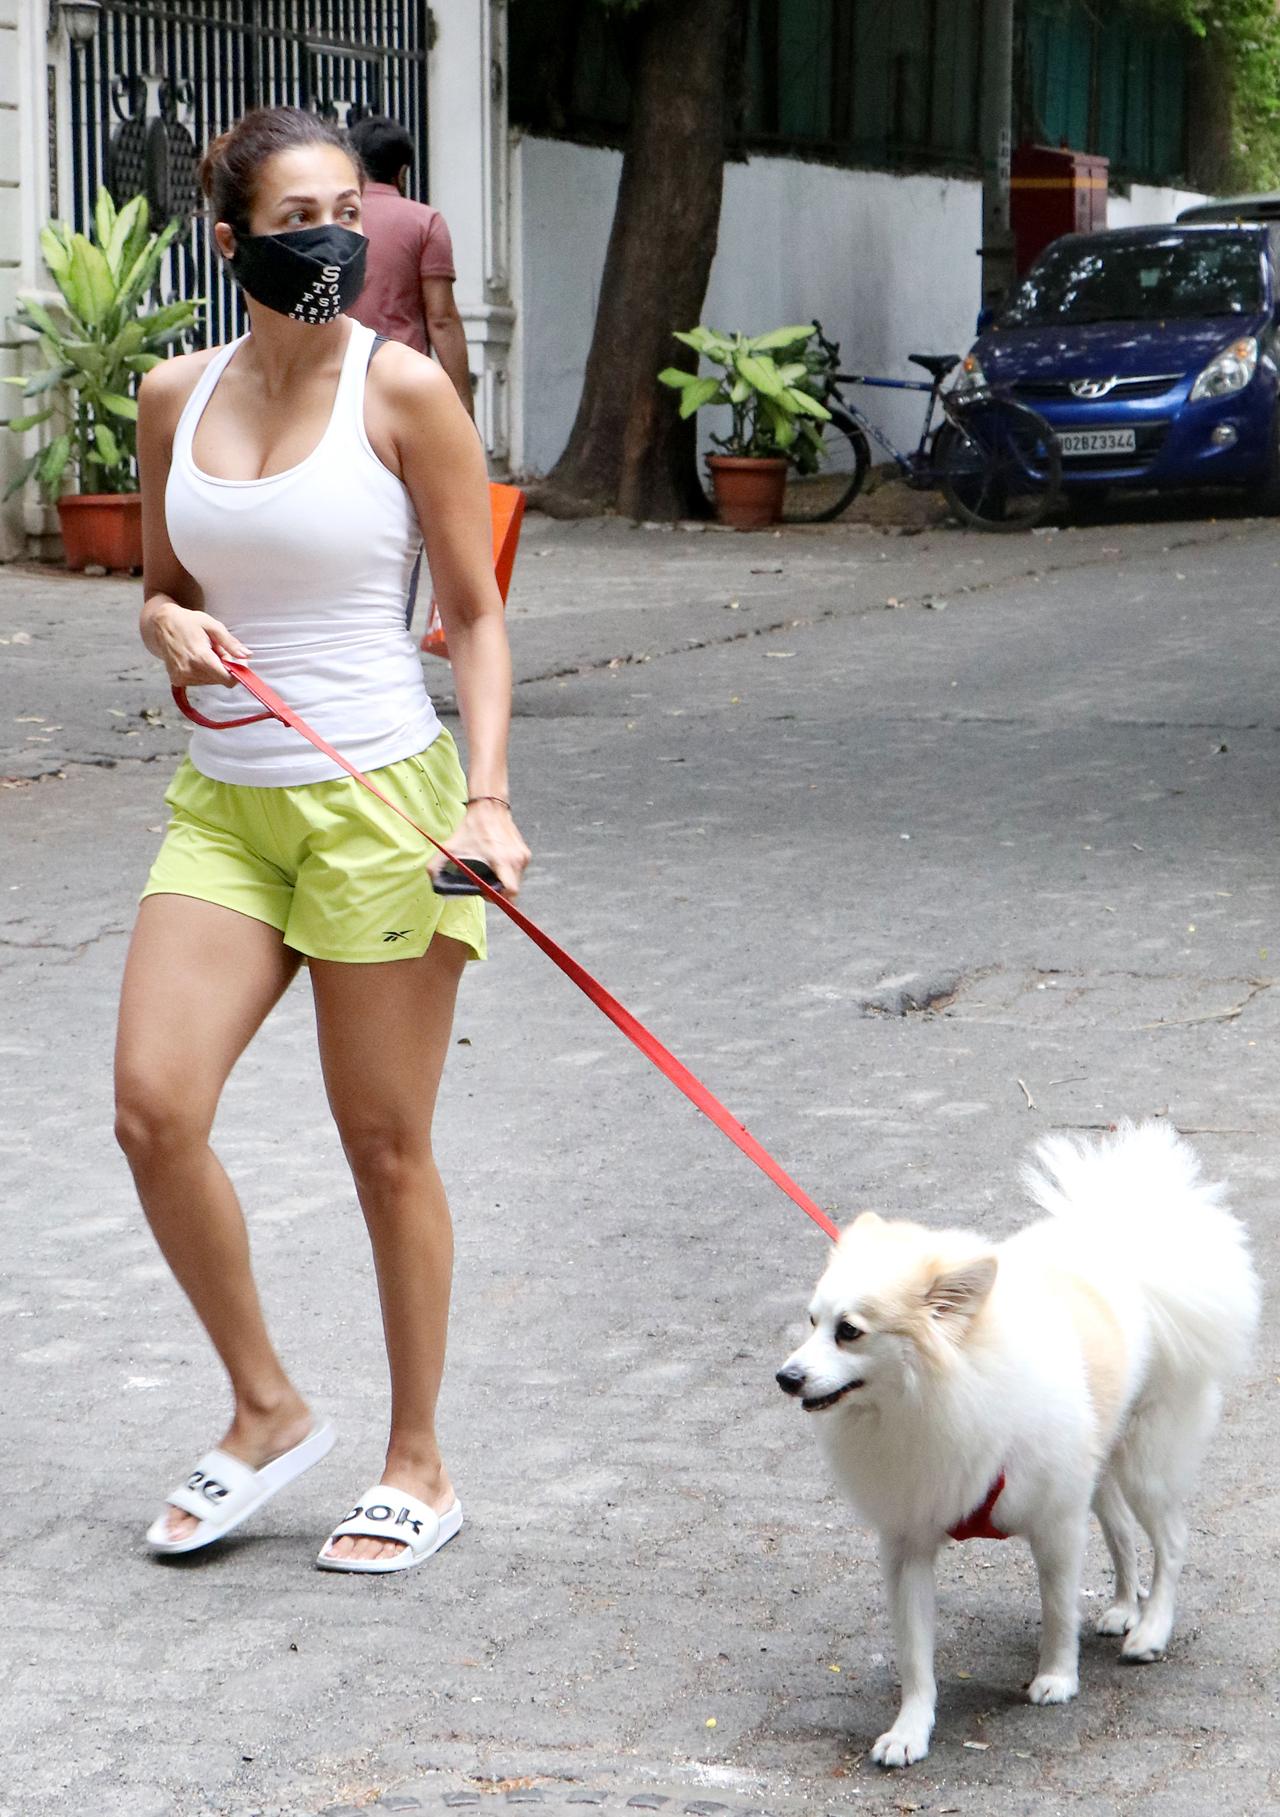 Malaika Arora was clicked on the streets of Bandra, as she stepped out of her house to take a stroll with her pooch. She was seen clad in a white tank top with yellow shorts and flats as she took her pet Casper for a walk. 